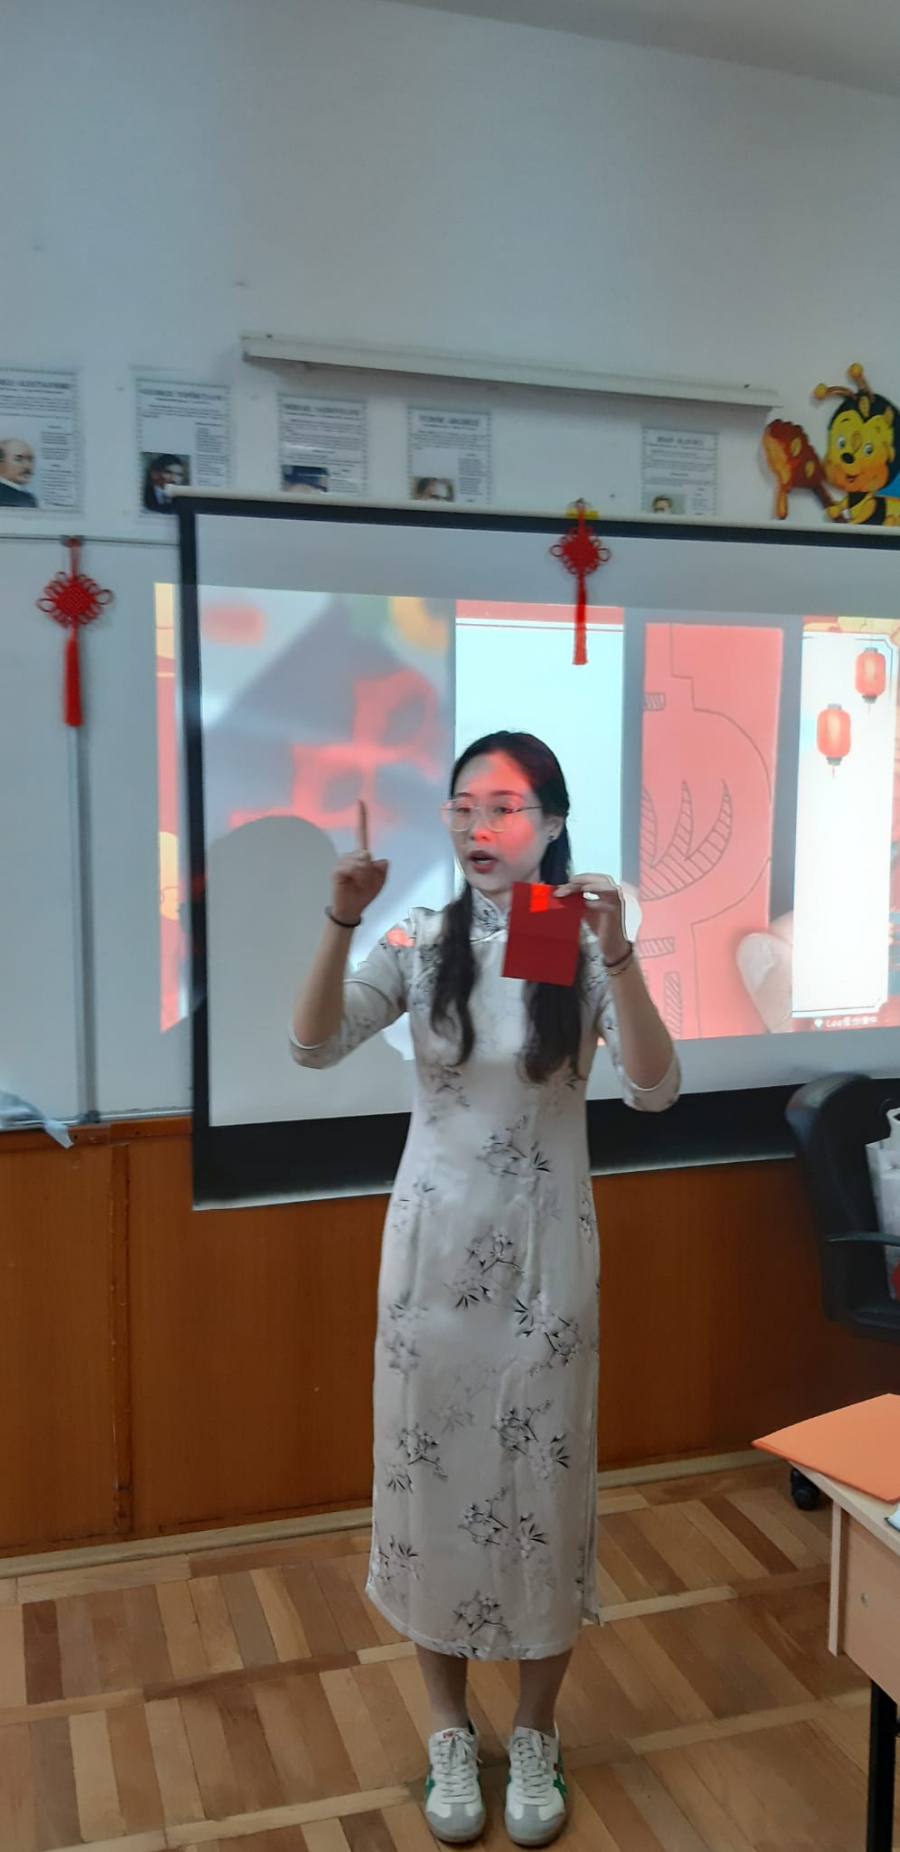 Teaching the chinese language, between art and passion